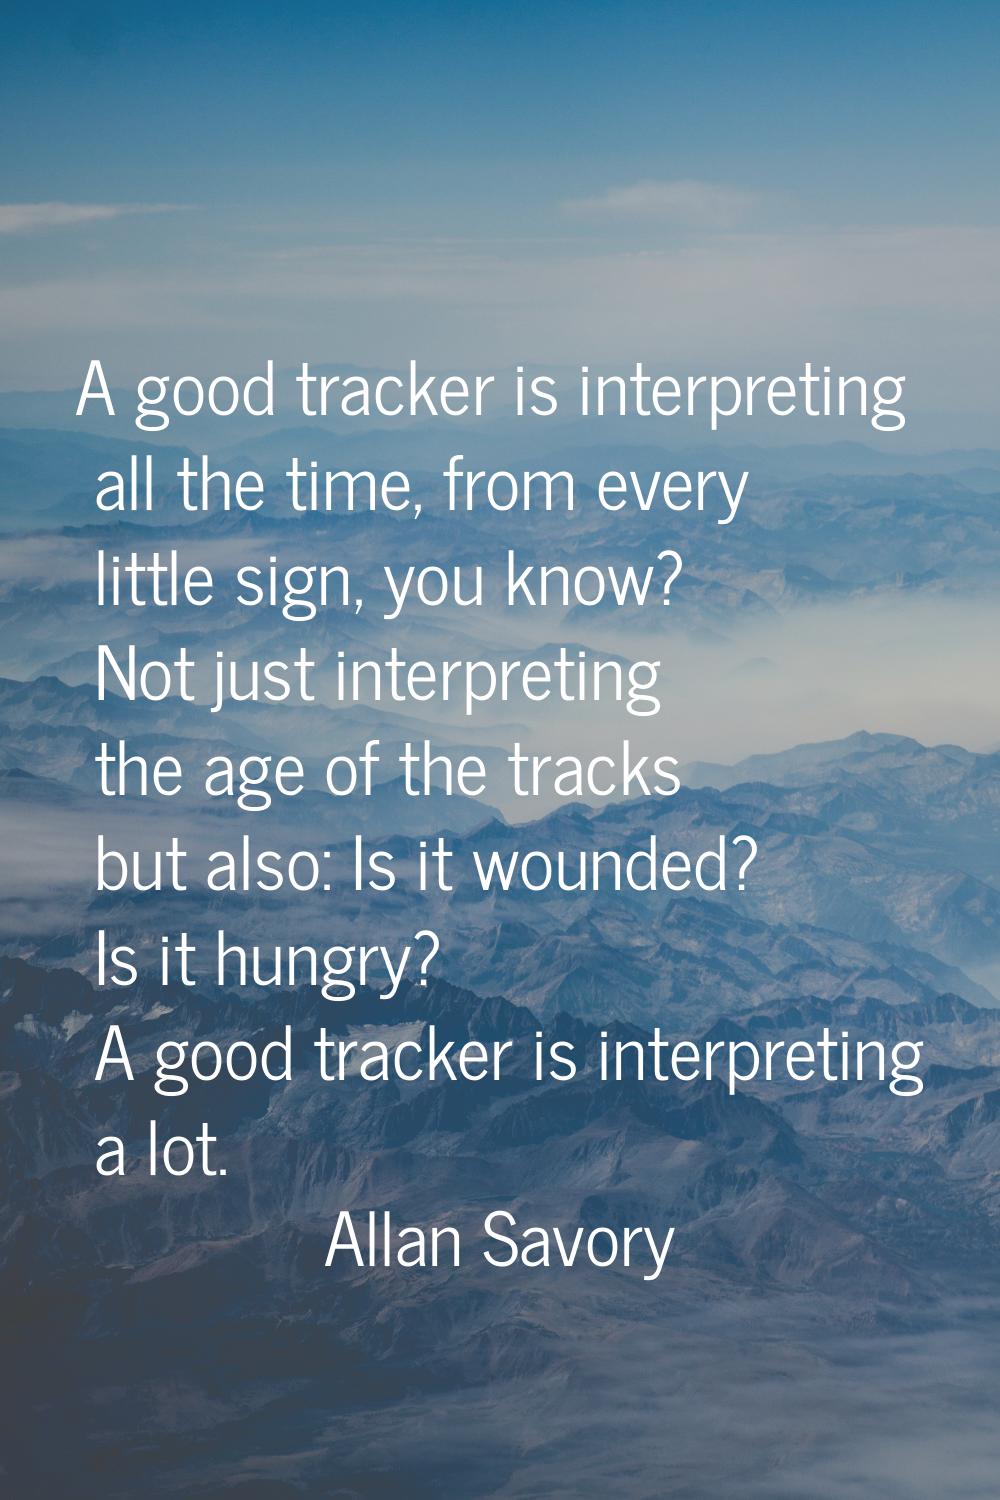 A good tracker is interpreting all the time, from every little sign, you know? Not just interpretin